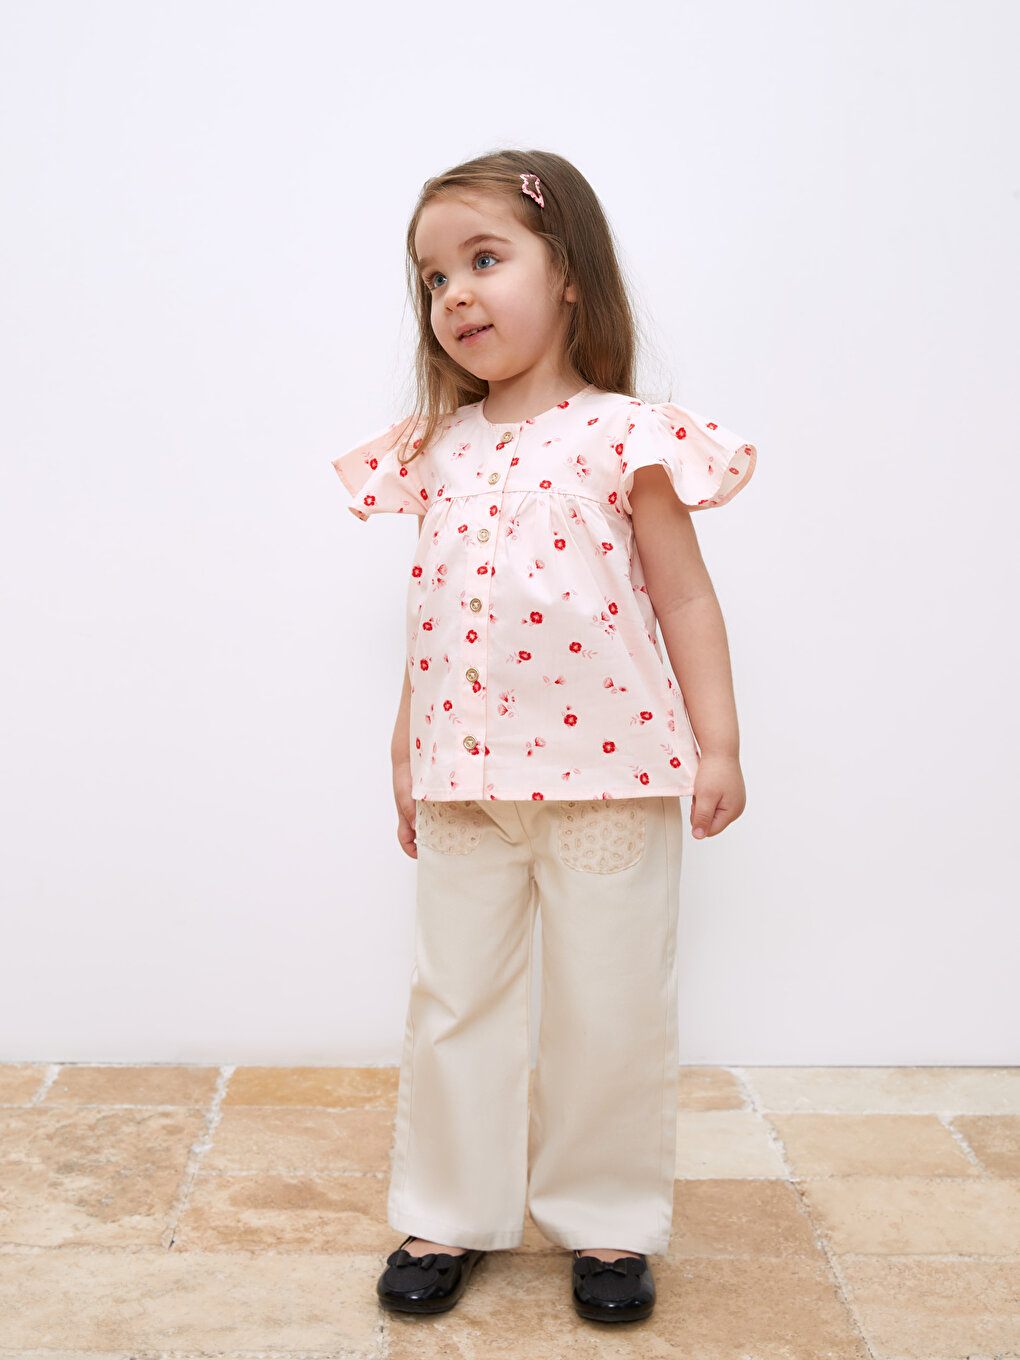 Infant Girl Summer Casual Trousers Toddler Stock Photo 1069603424   Shutterstock